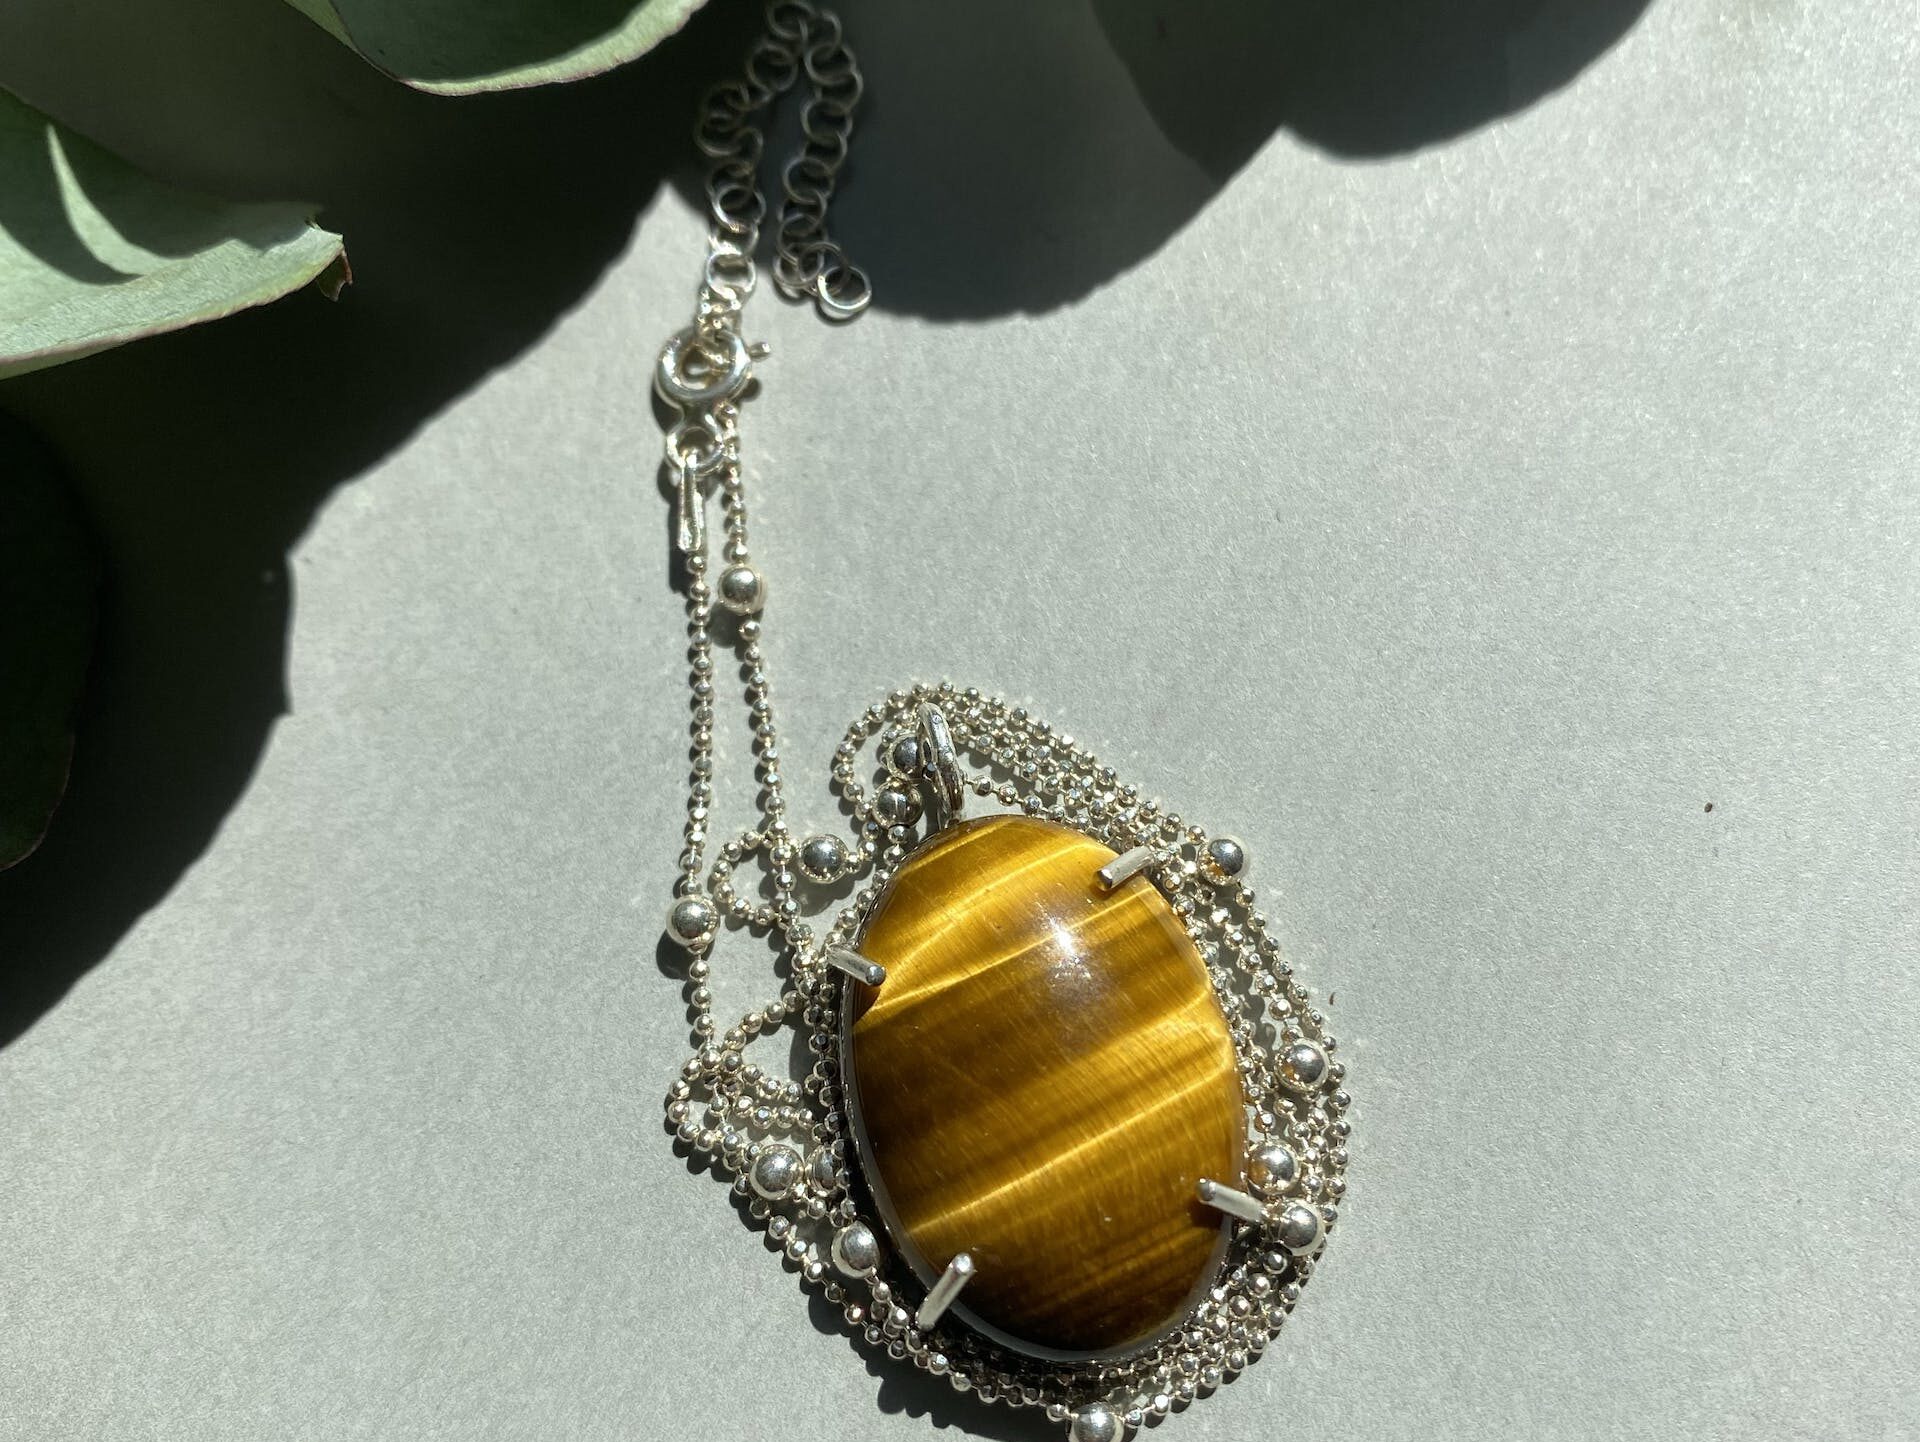 A tiger eye pendant on a chain